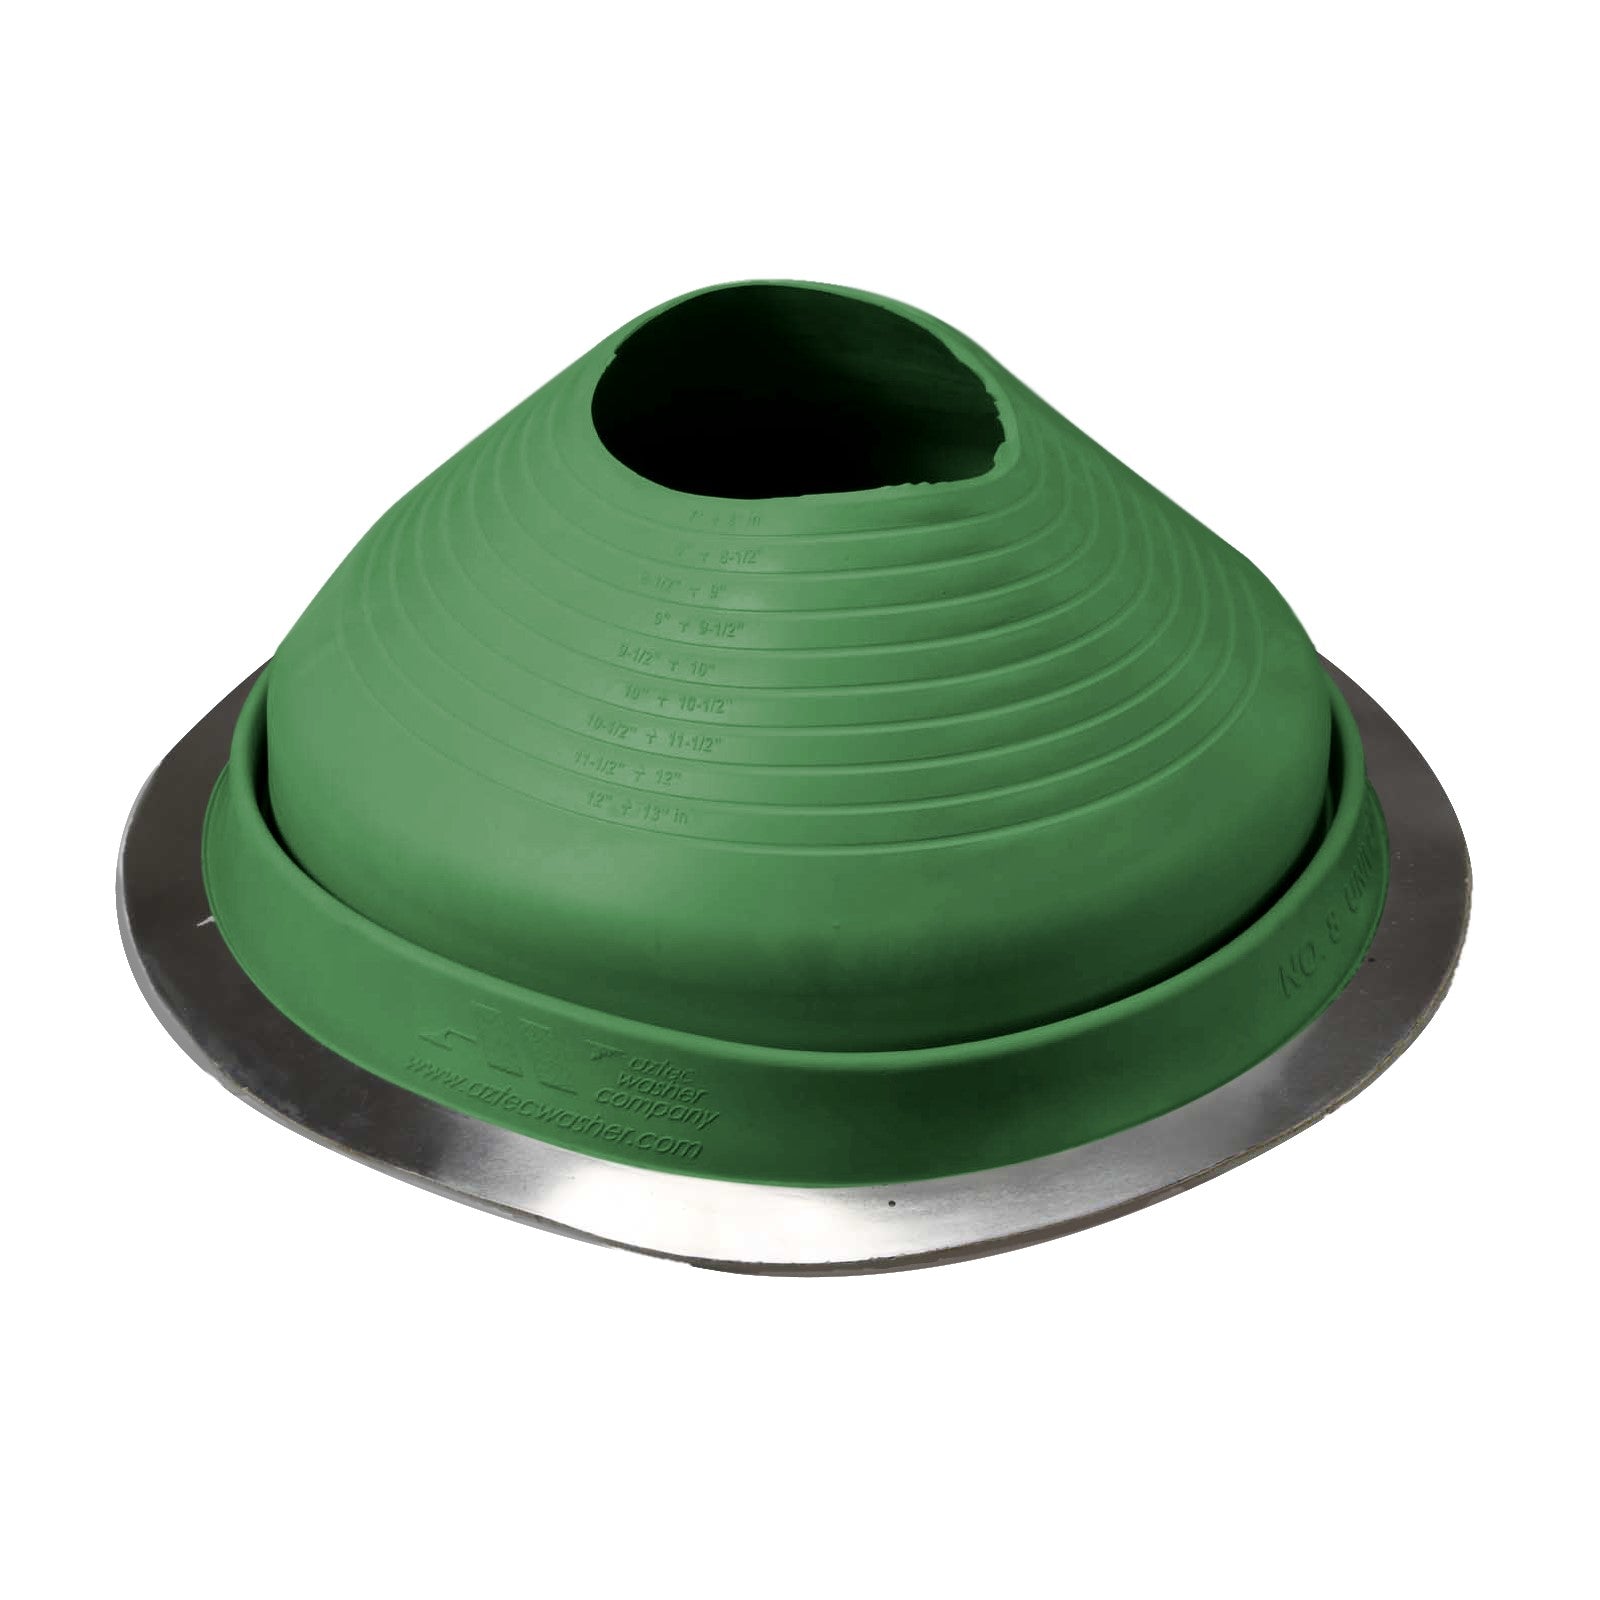 #8 Roofjack Round EPDM Pipe Flashing Boot Light Green